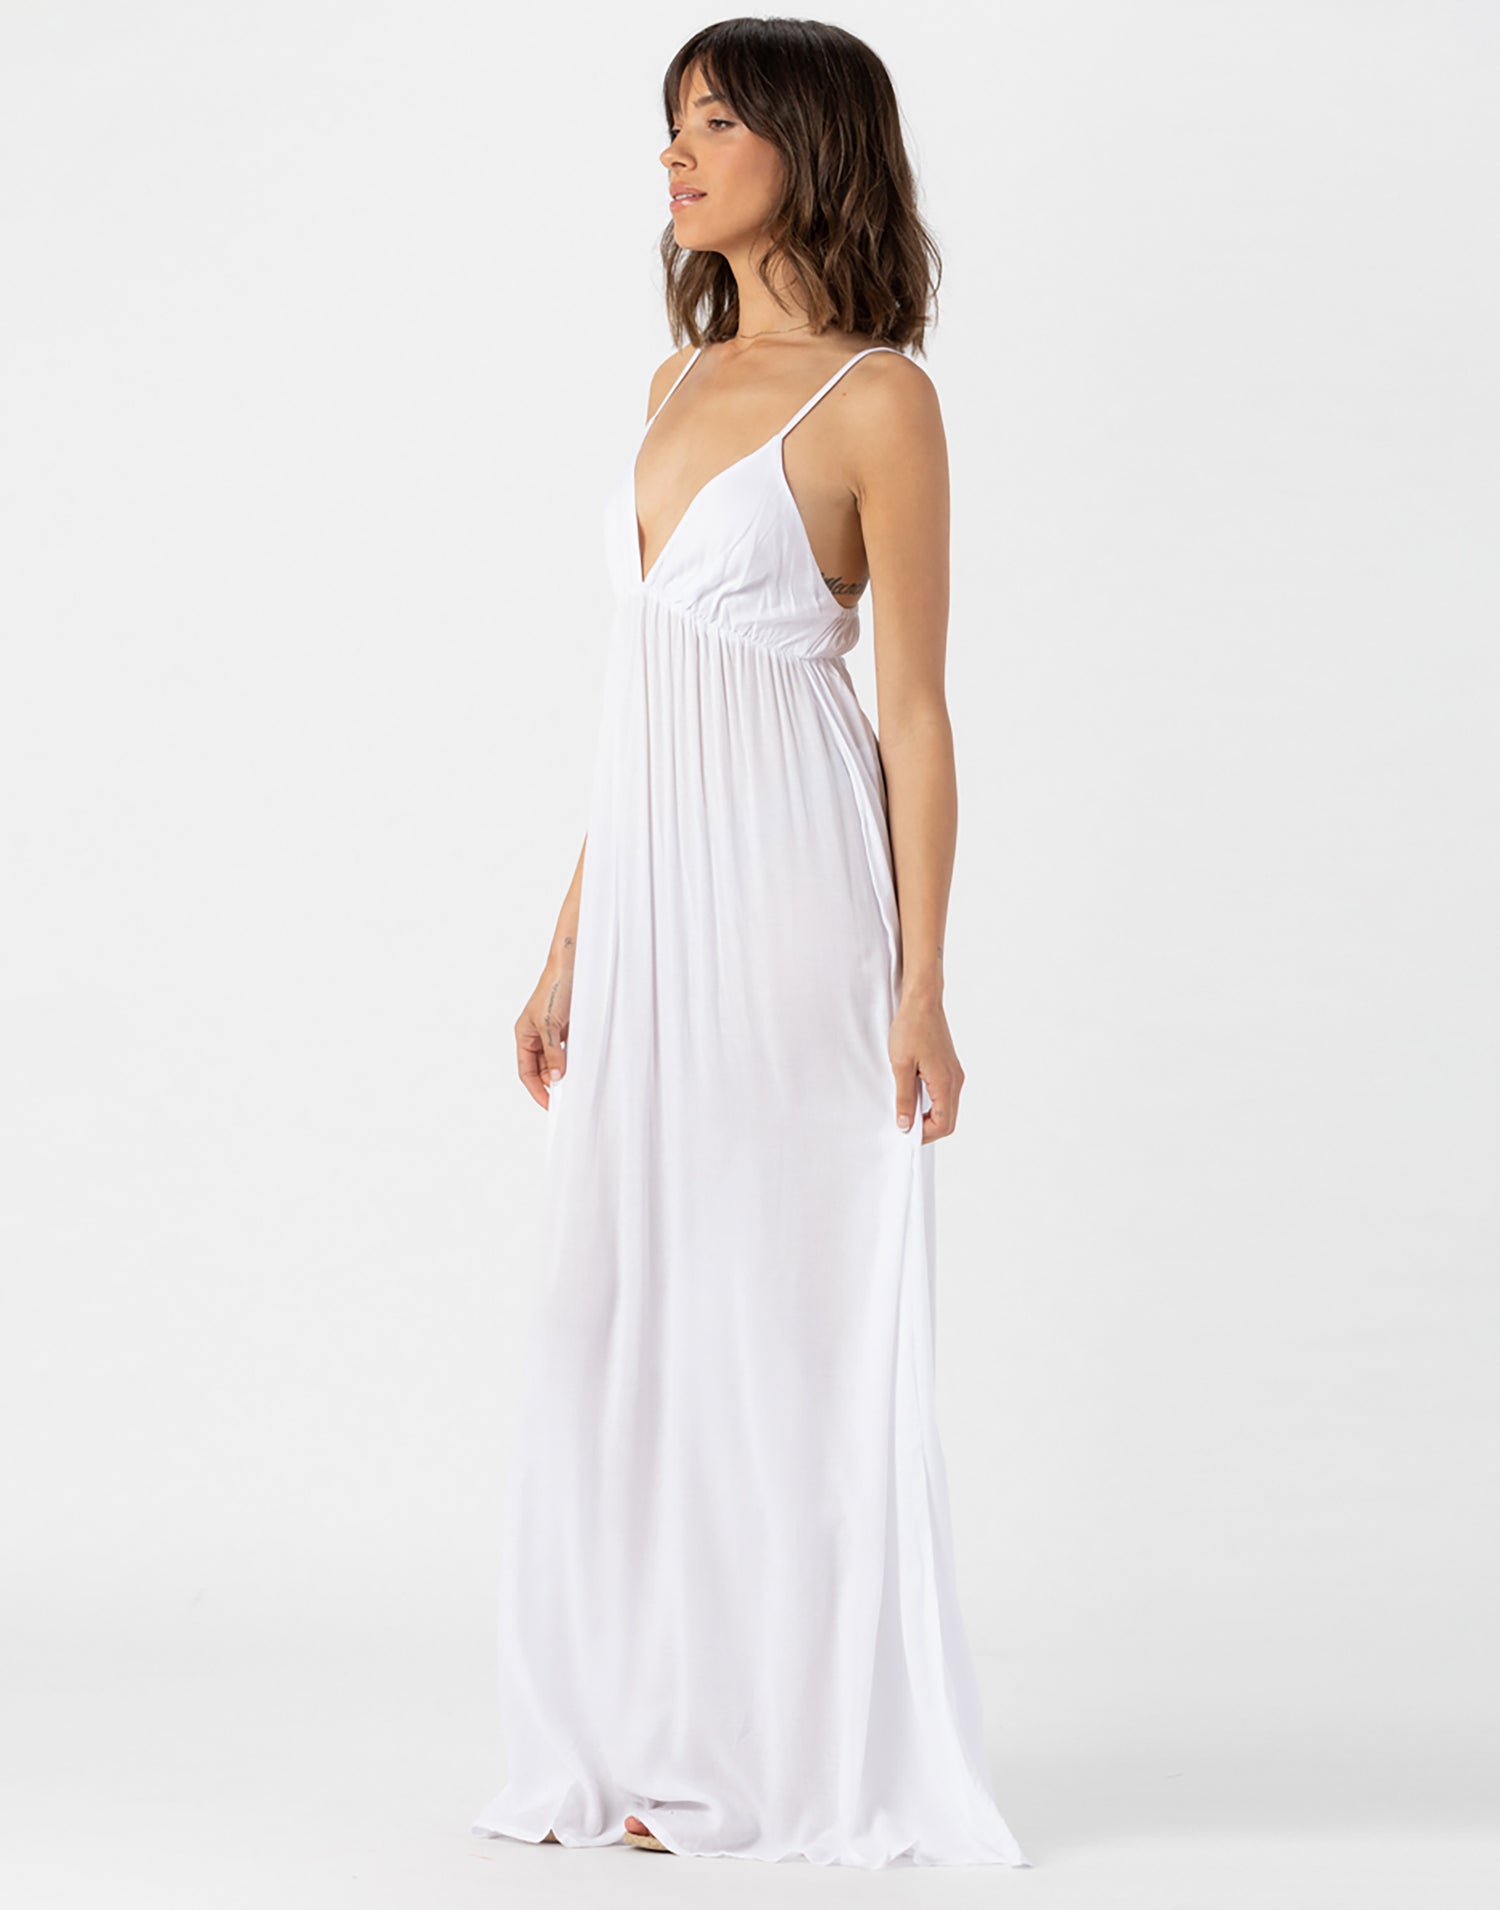 Gracie Maxi Dress by Tiare Hawaii in White - Angled View